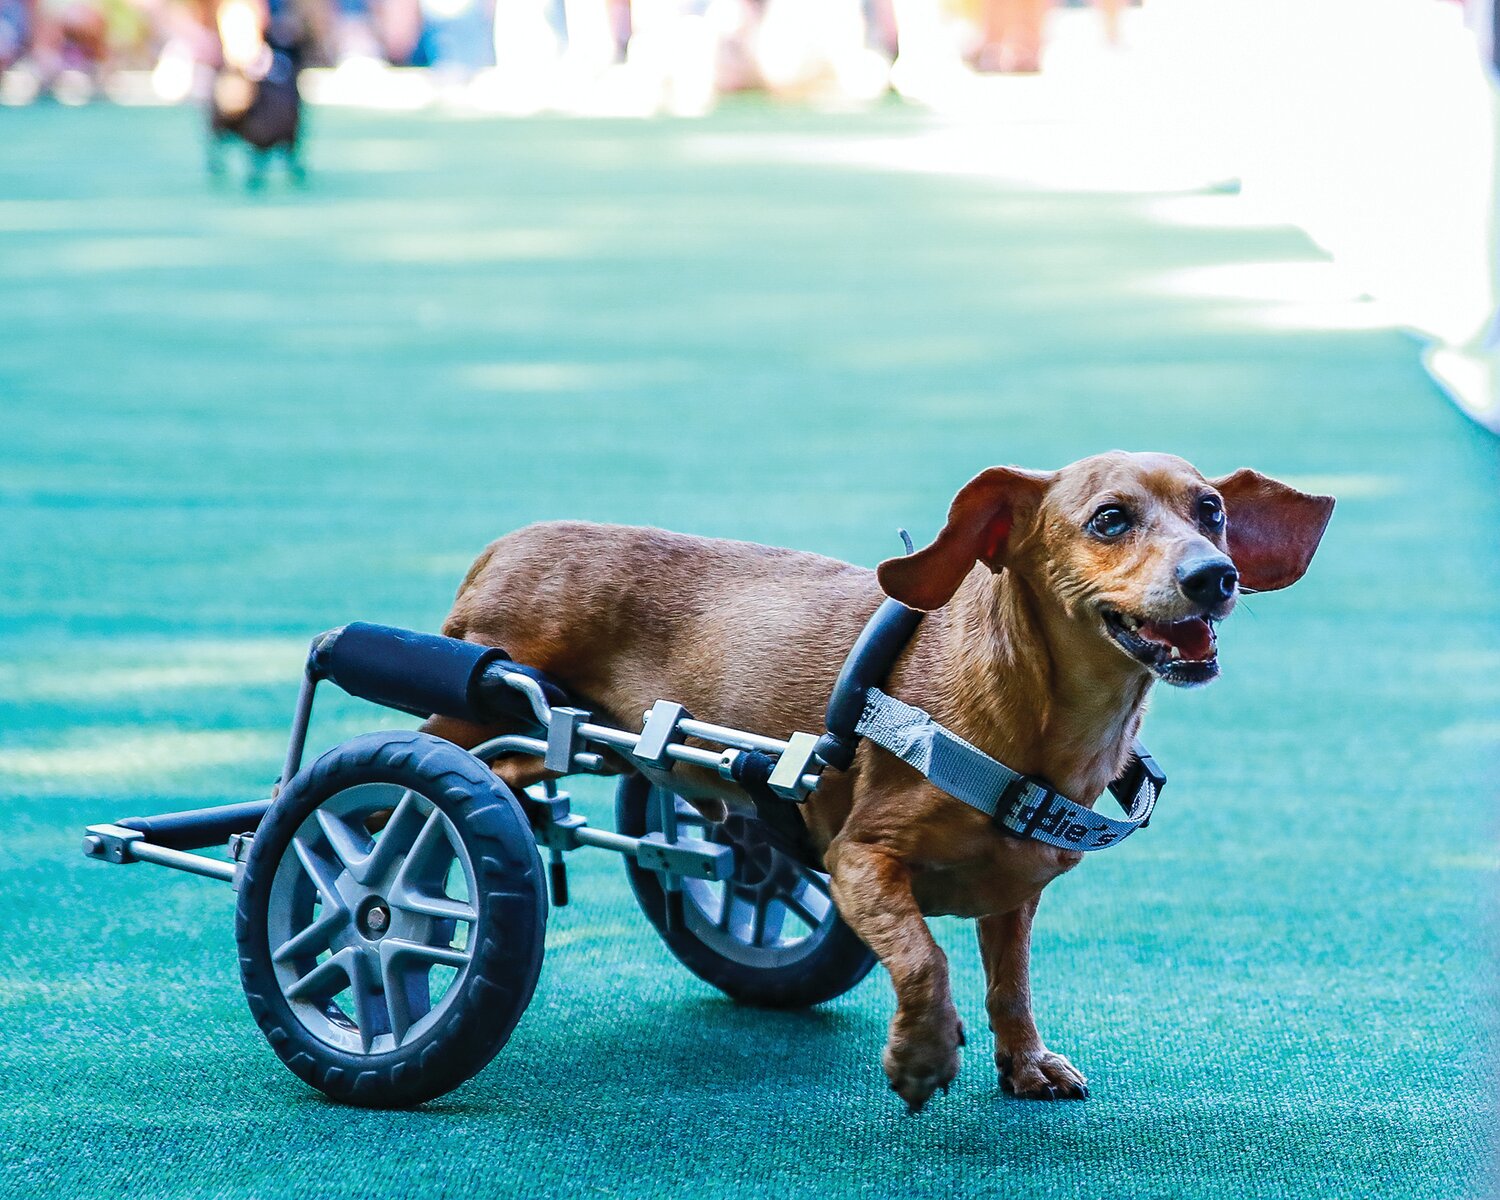 A handi-capable dachshund competed in the wiener dog races but quickly turned around back to its owner in a happy manner that caused a collective “awe” from the crowd at Ridgefield’s Oktoberfest on Saturday, Sept. 9.